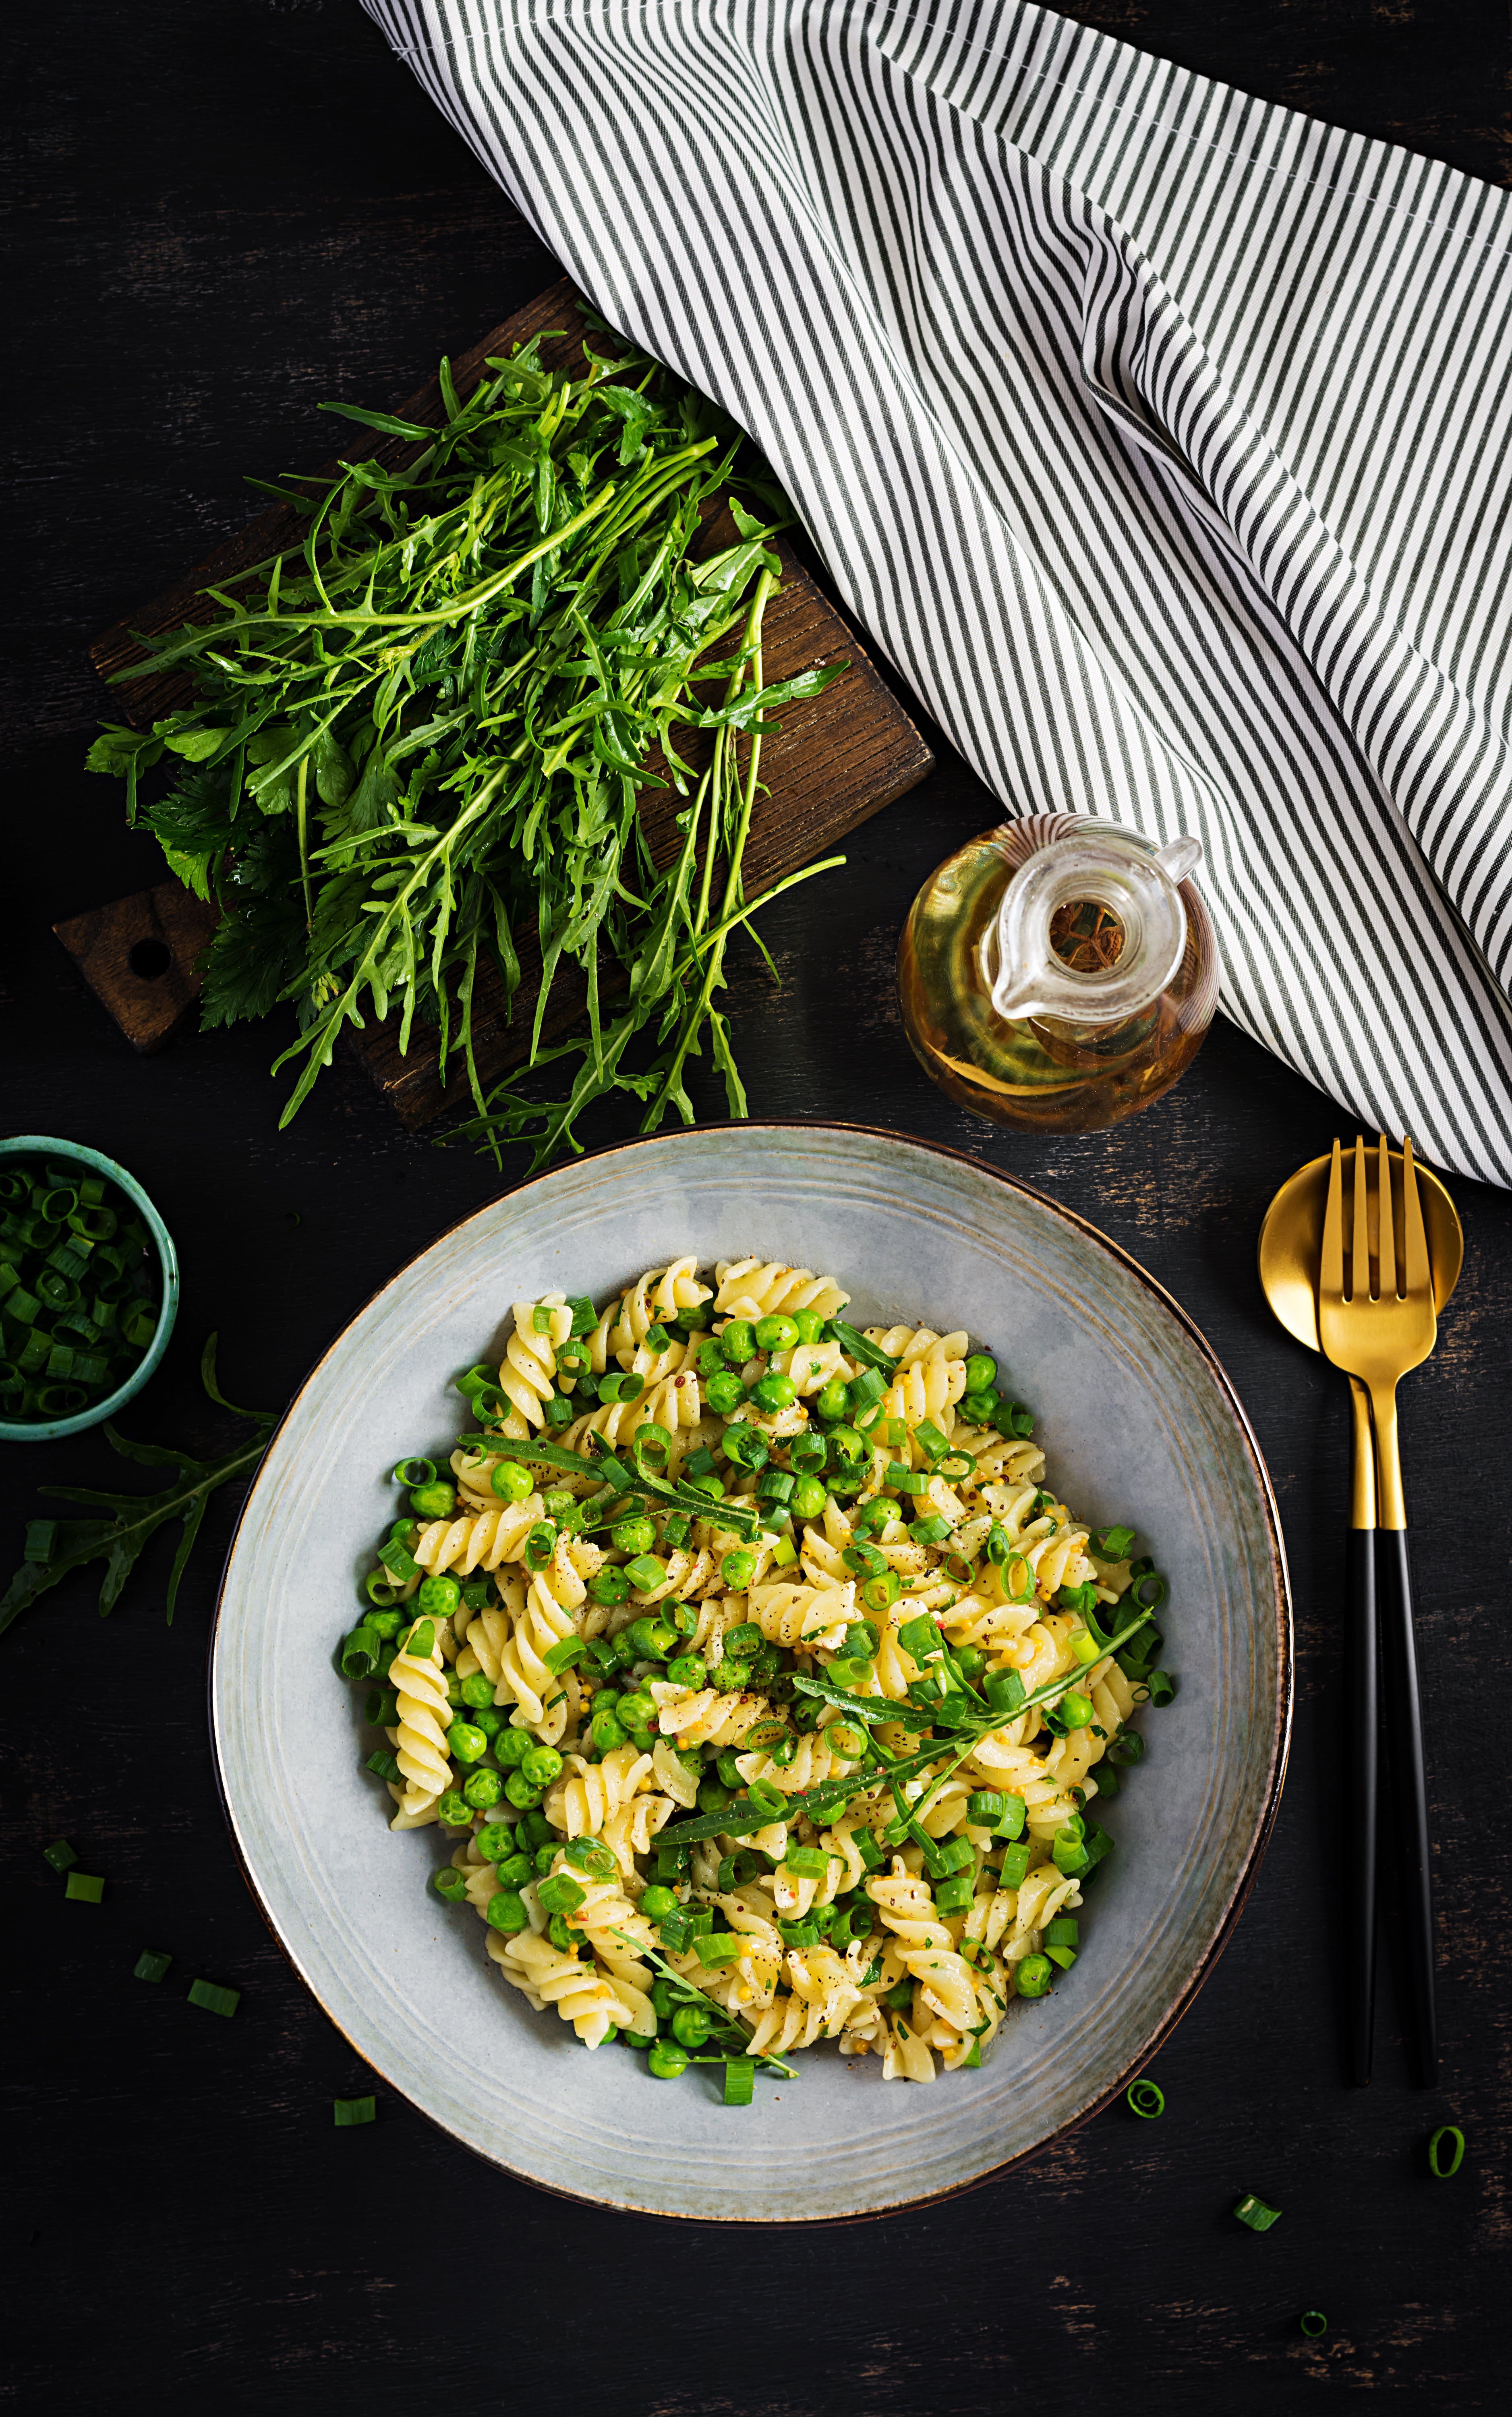 The pesto in this pasta is a sauce, herb salad and nut garnish in one